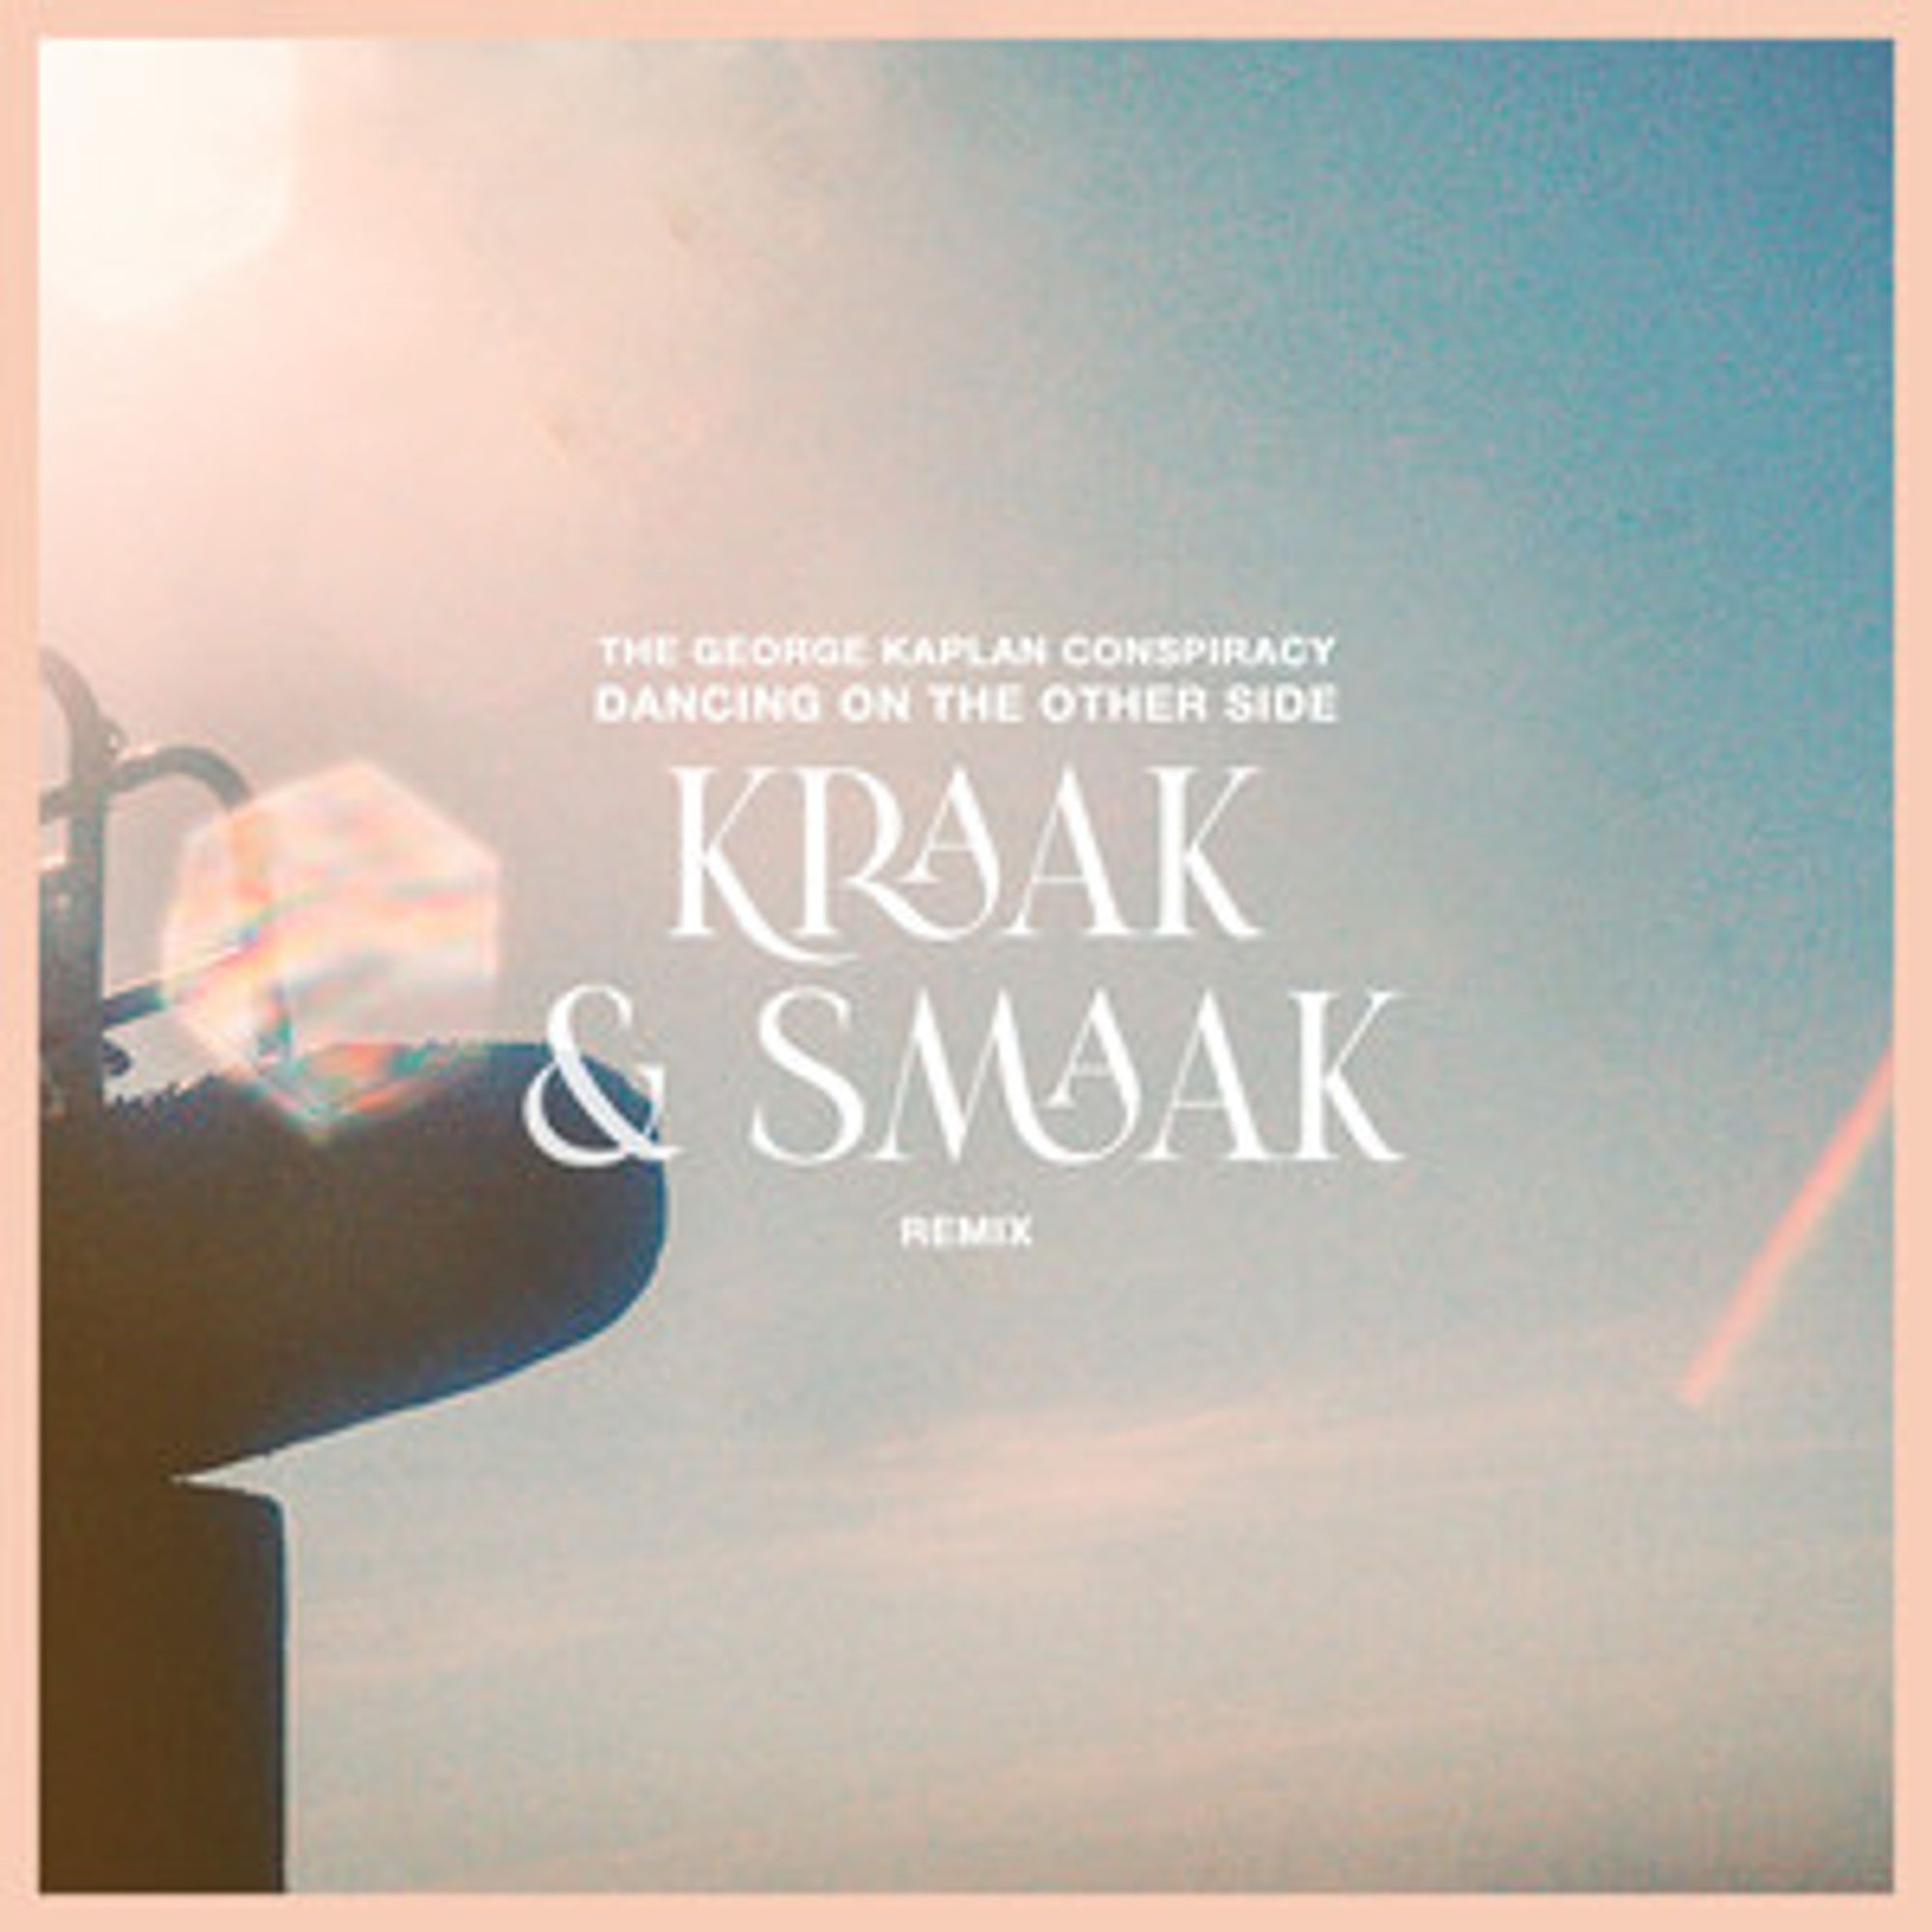 Dancing On the Other Side - Kraak & Smaak Remix